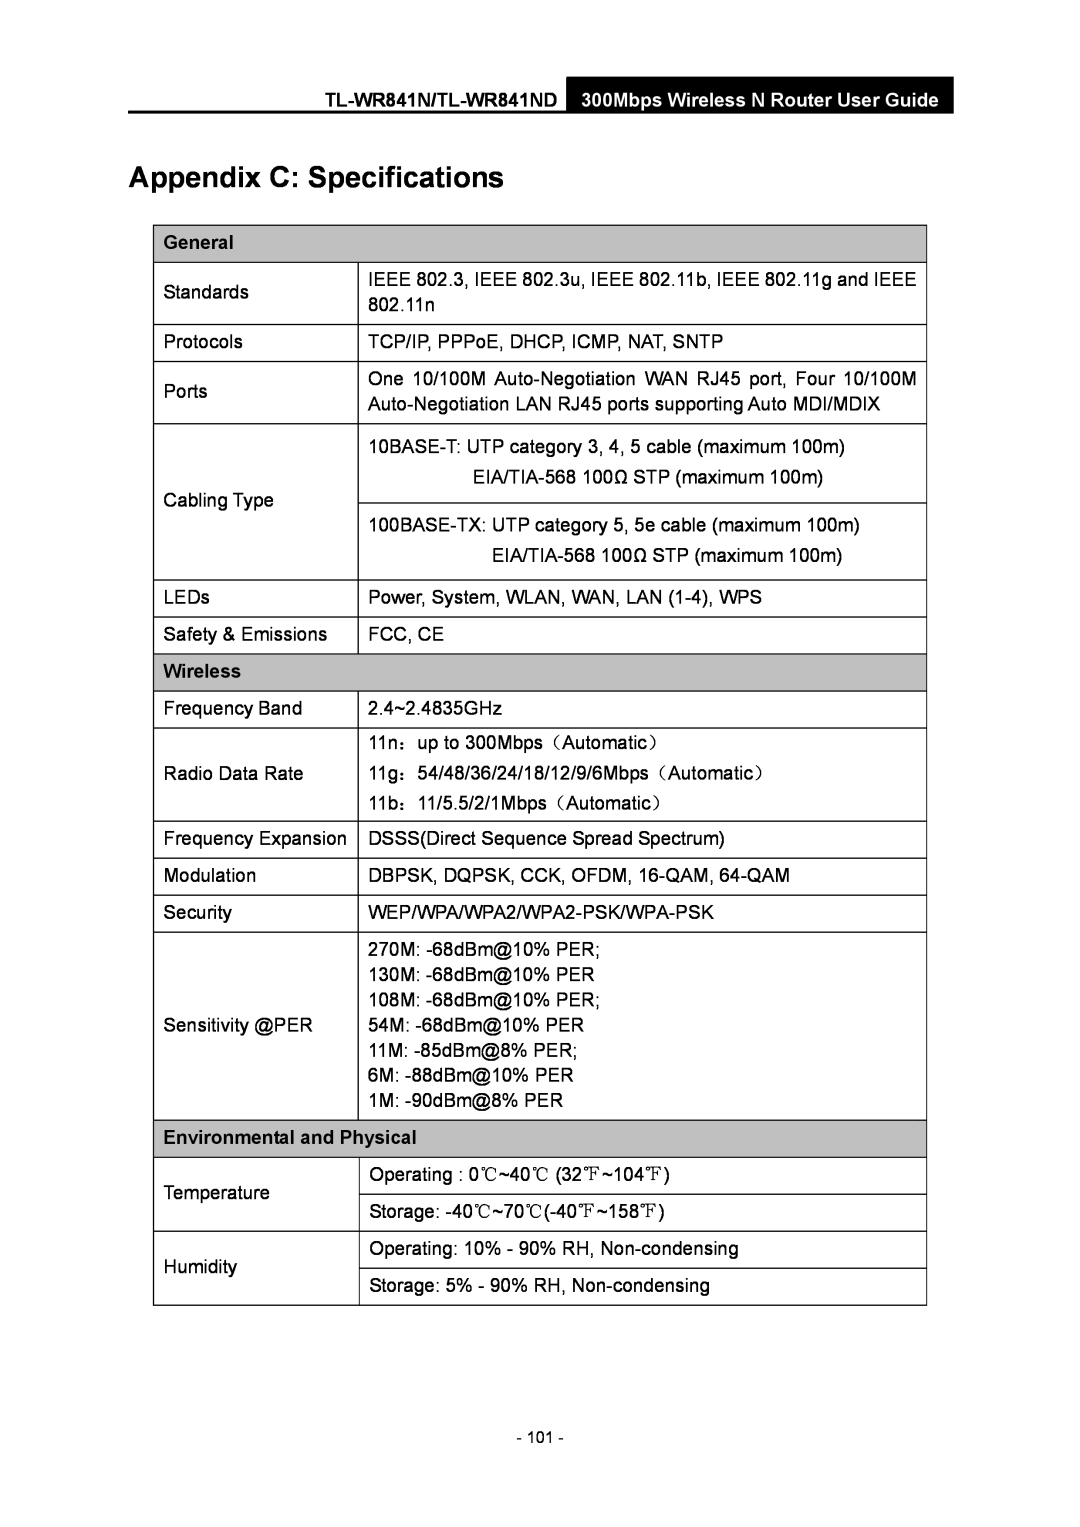 TP-Link TL-WR841N manual Appendix C Specifications, General, Wireless, Environmental and Physical 